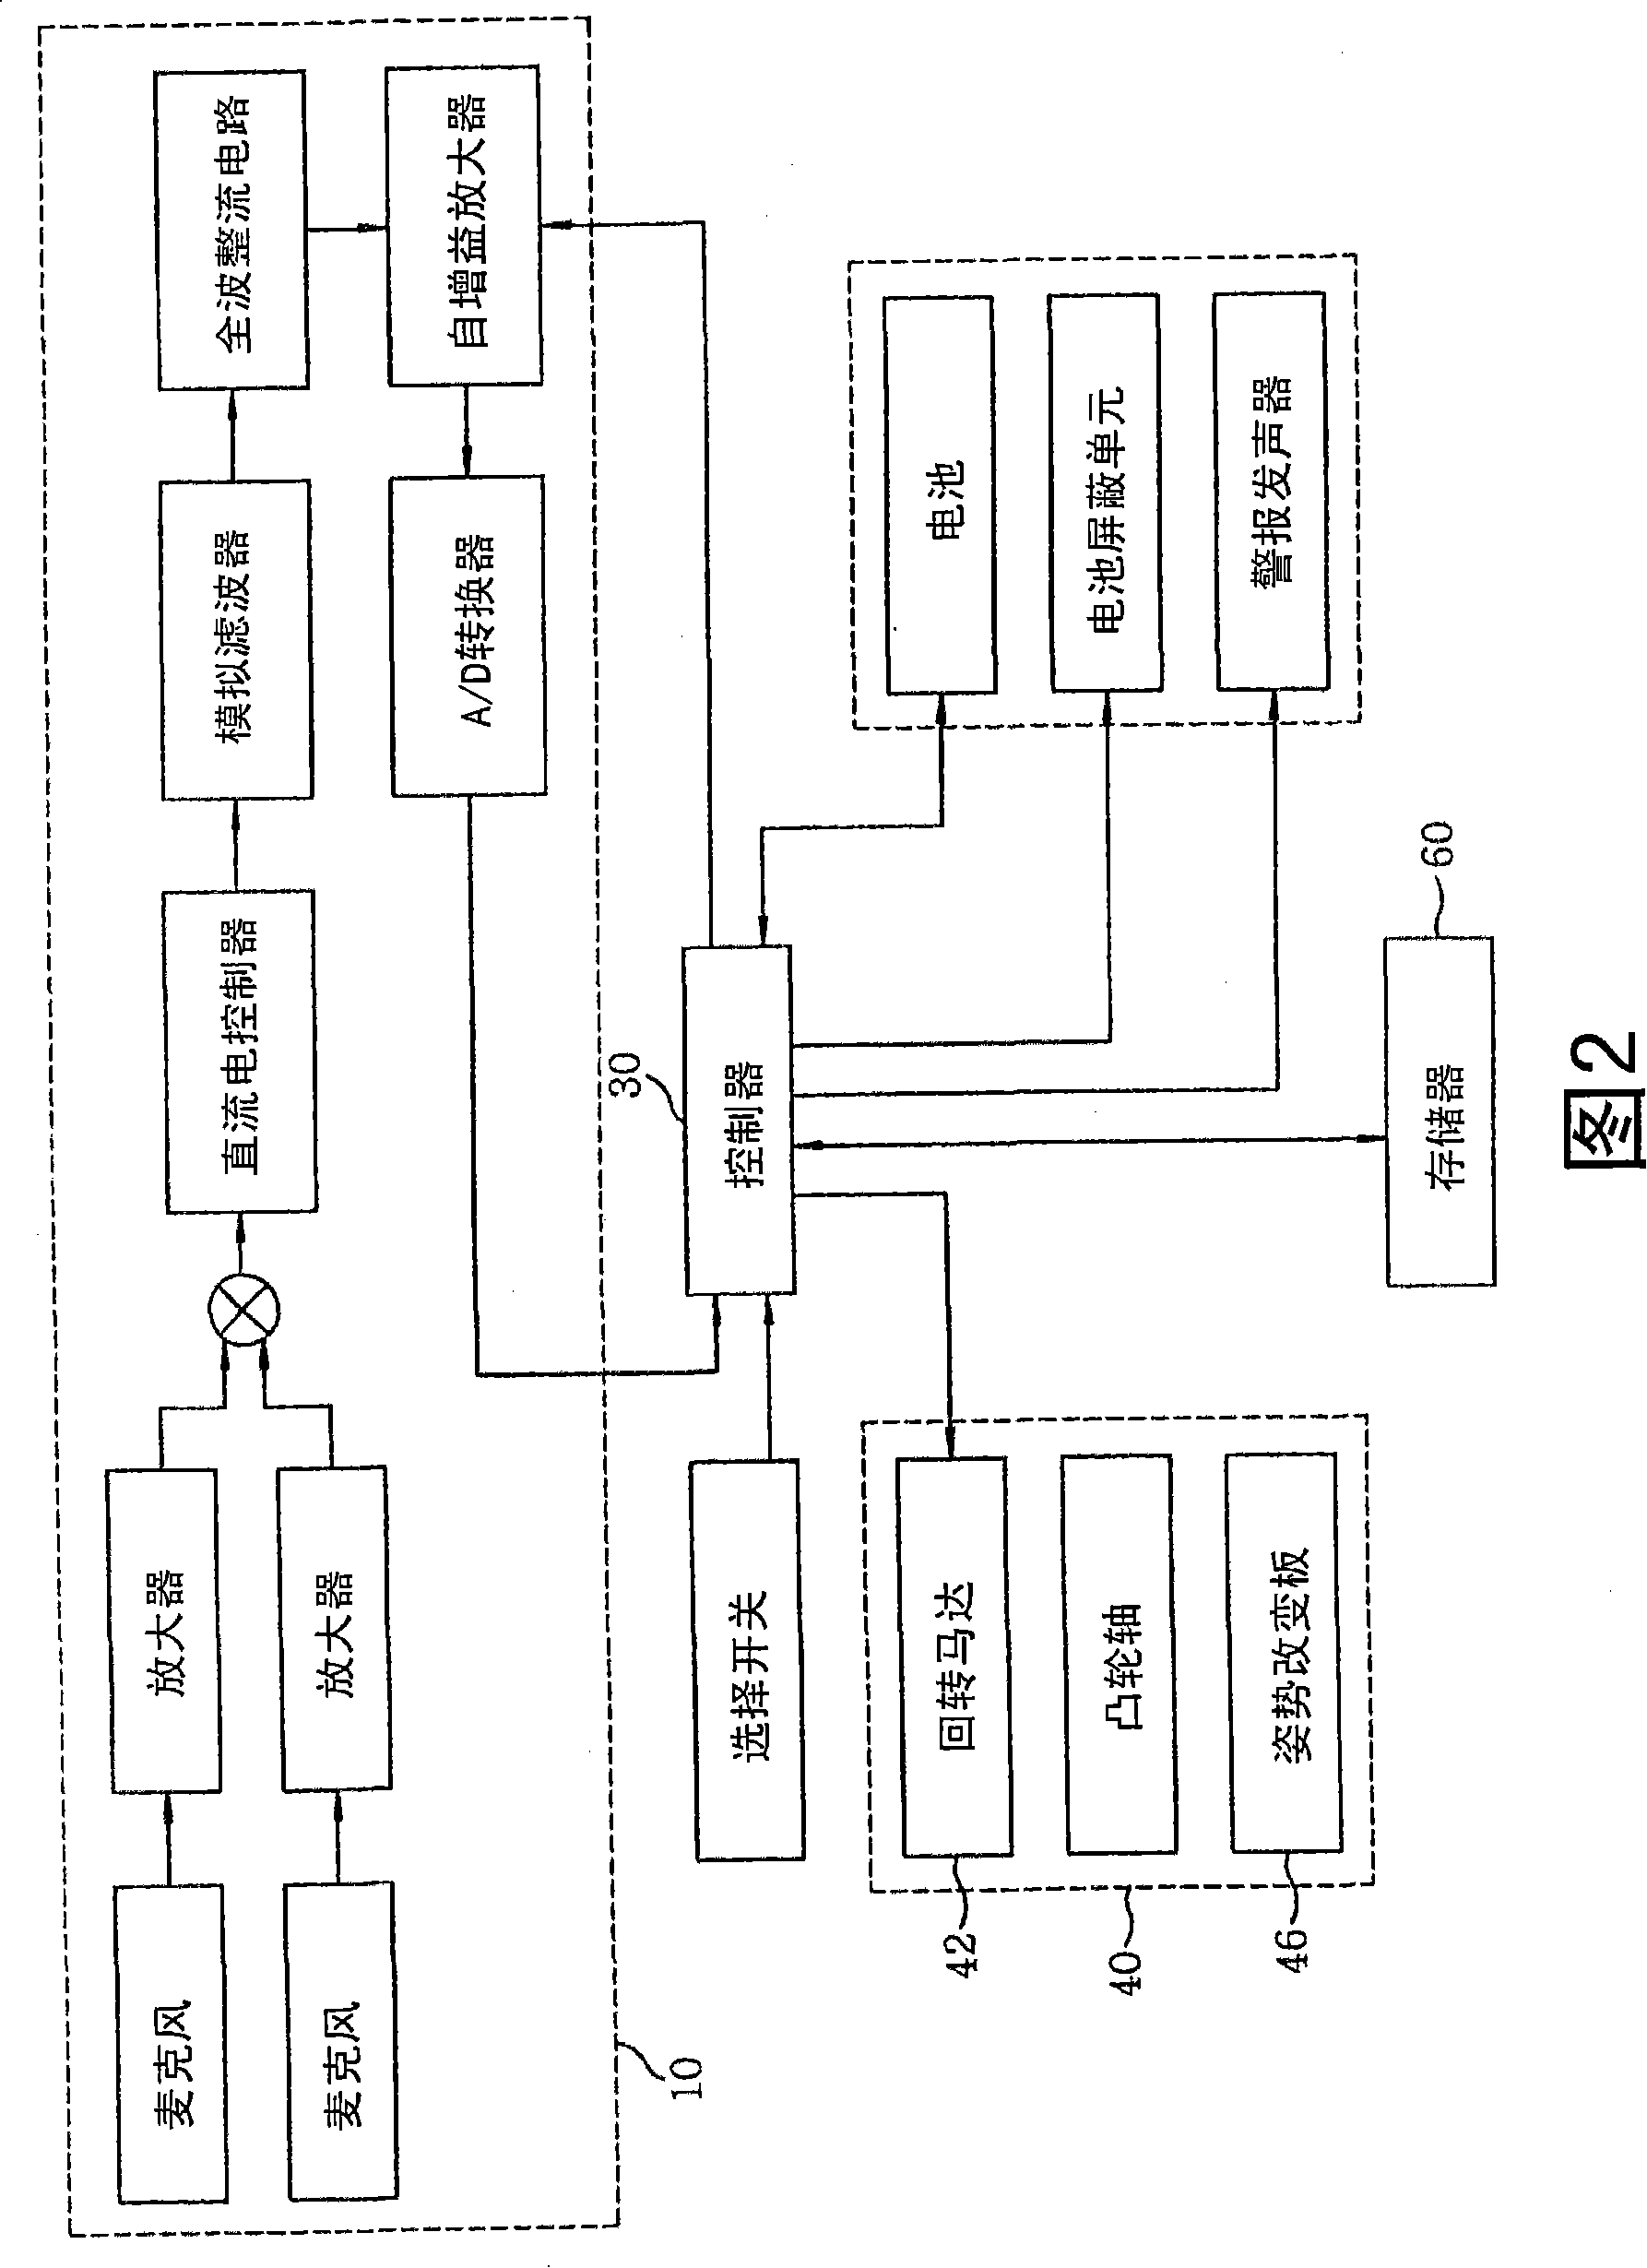 Apparatus for preventing snoring and method using same